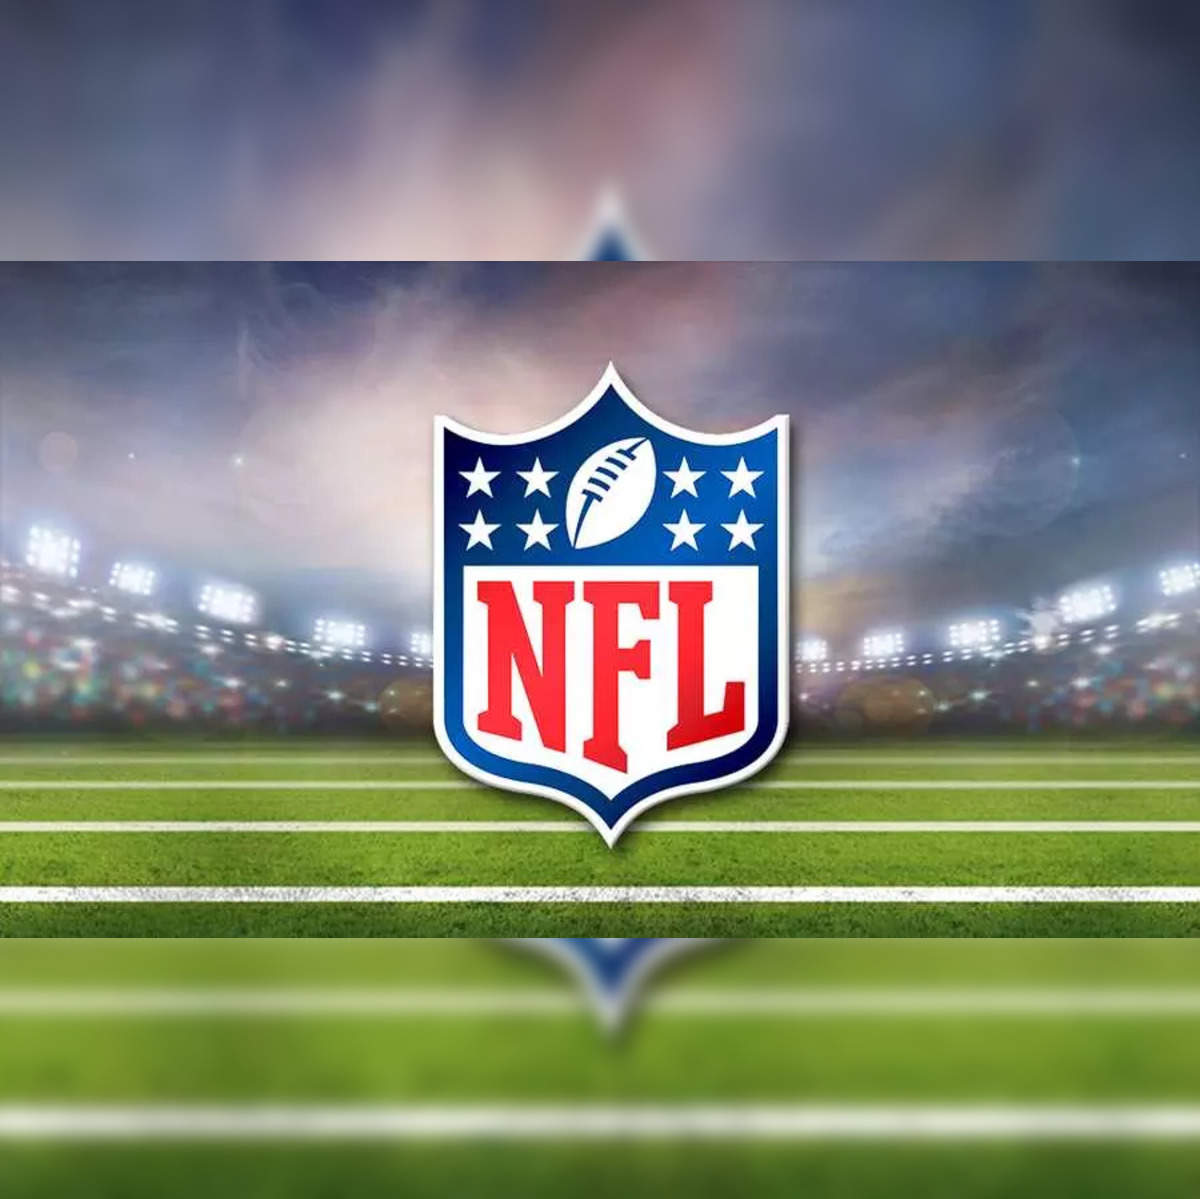 nfl NFL Sunday Ticket on Youtube TV How to watch? Check free live streaming details, prices and more